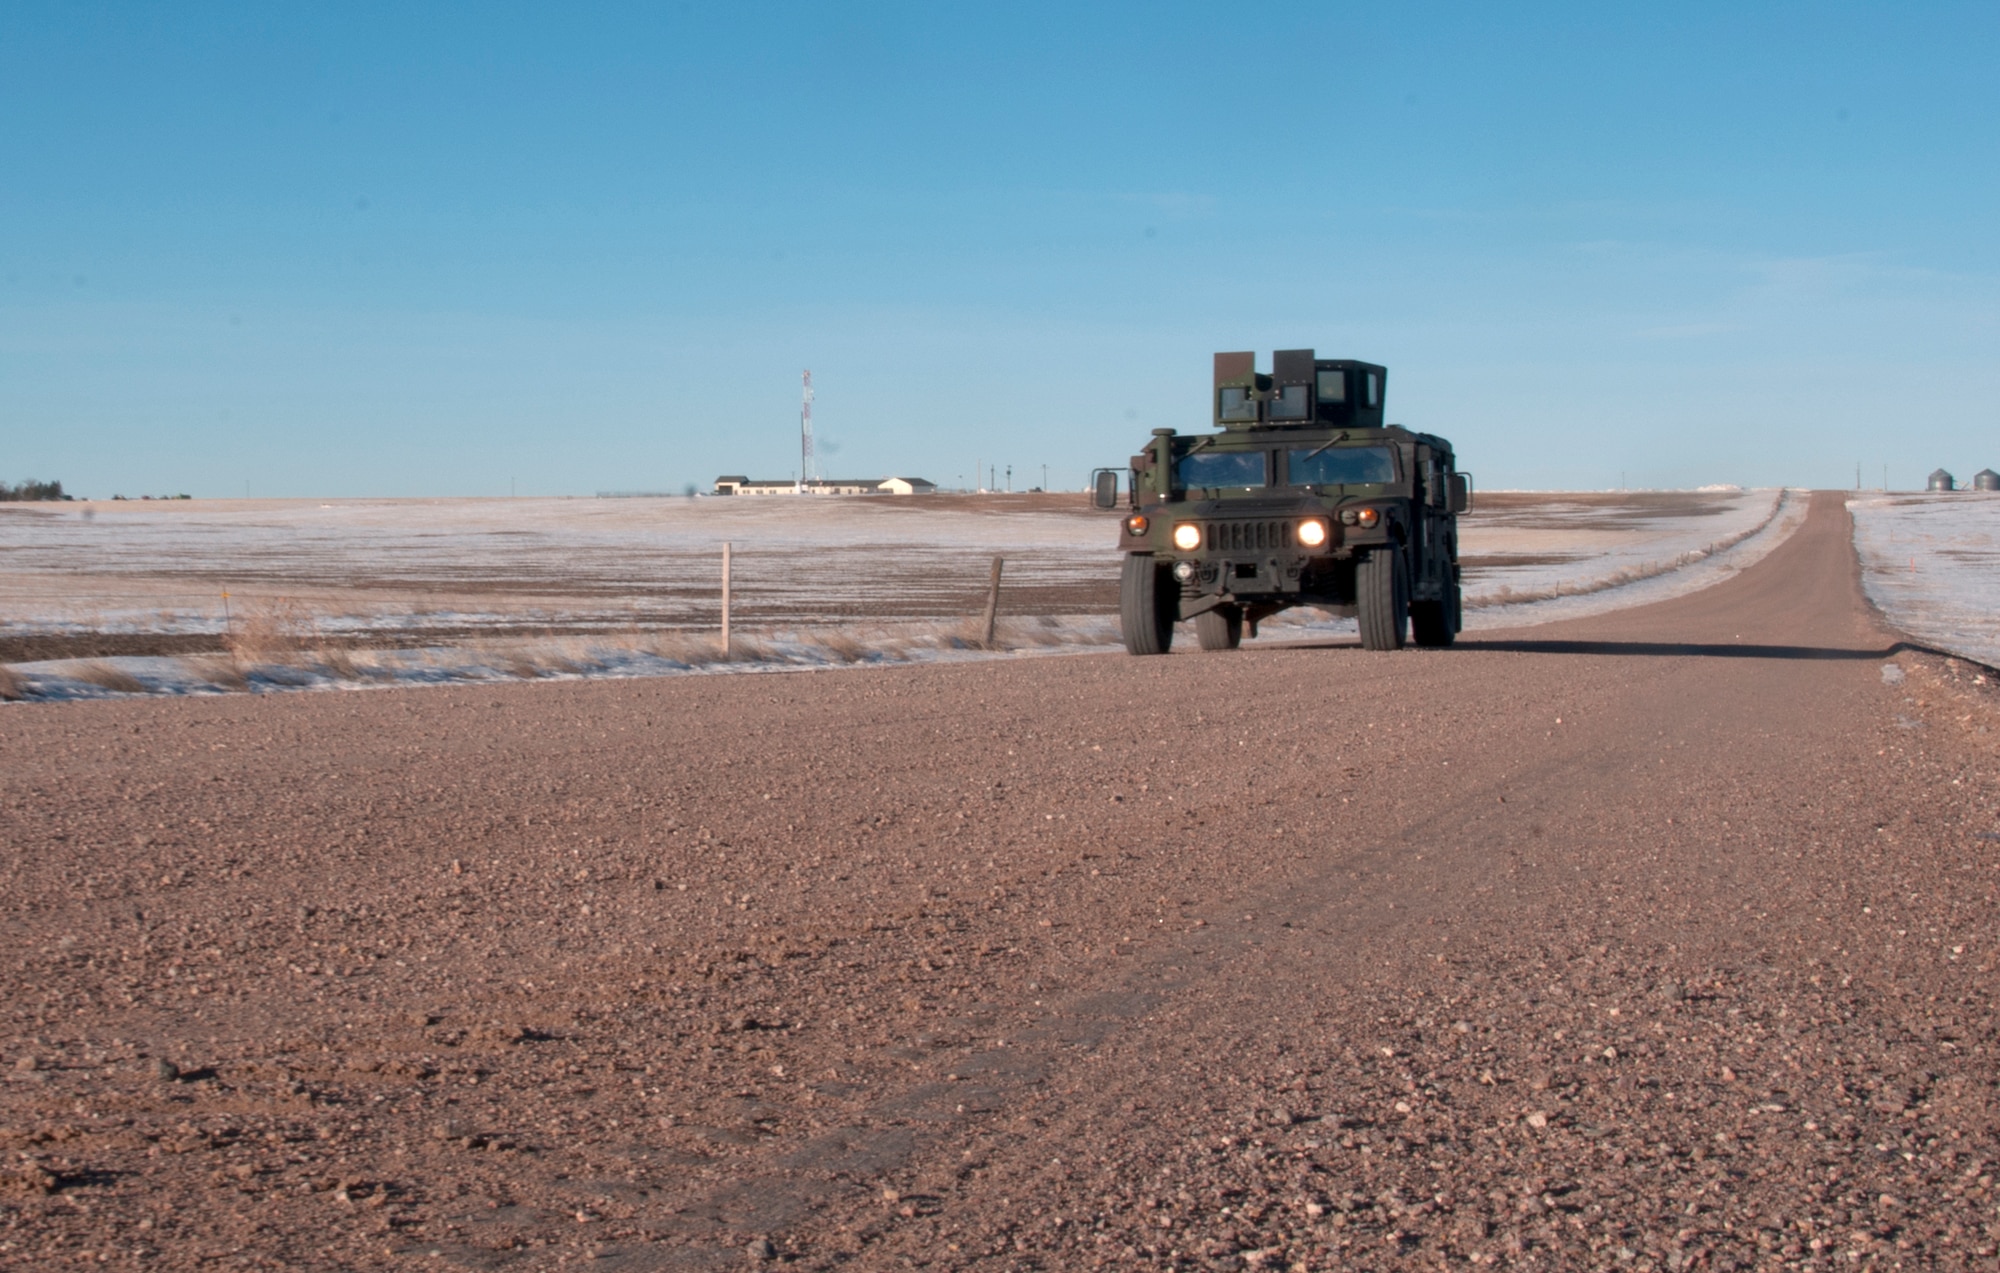 A 90th Missile Security Force Squadron Humvee patrols in the F.E. Warren Air Force Base, Wyo., missile complex Feb. 9, 2016, A Simulated Electronic Launch-Minuteman test was conducted that day. (U.S. Air Force photo by Senior Airman Jason Wiese)